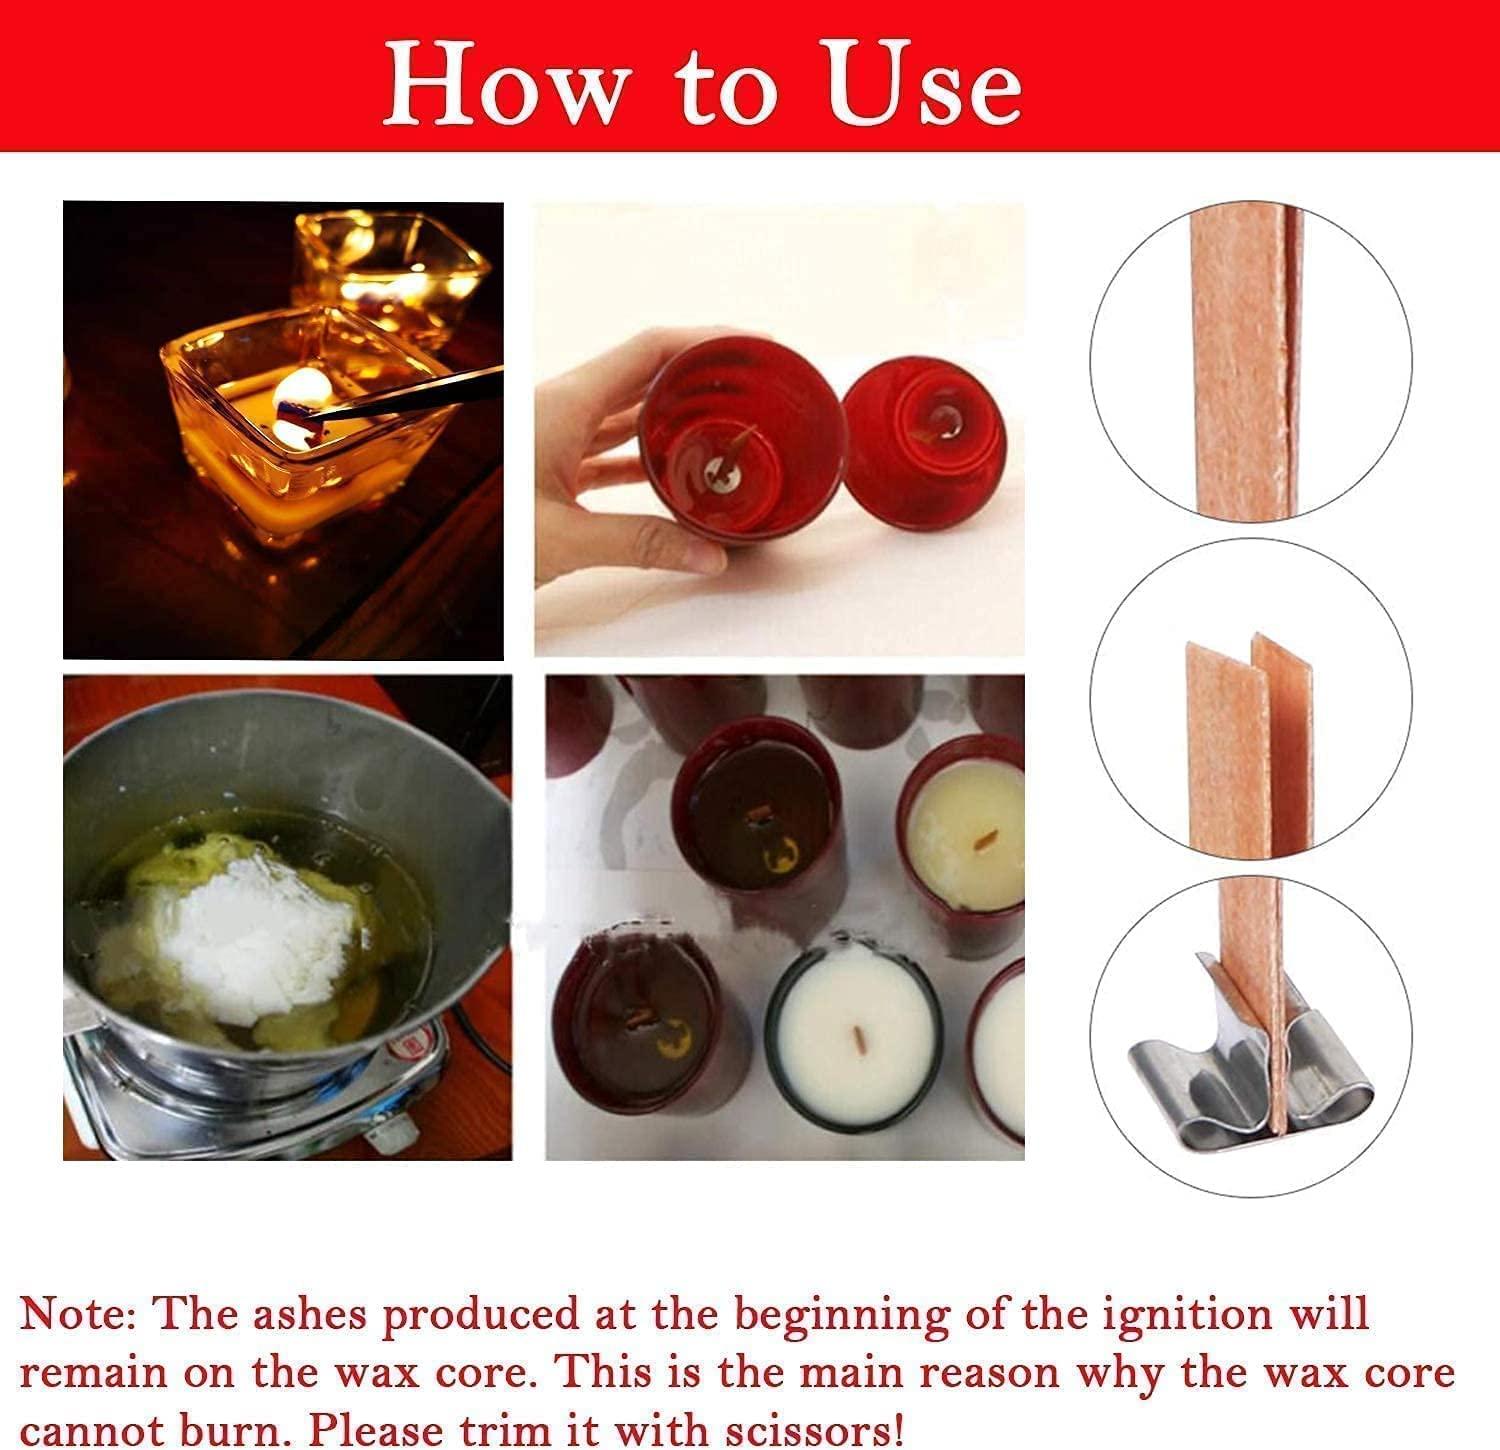 Over on eHow: Cracking the Code on How to Make Wooden Candle Wicks